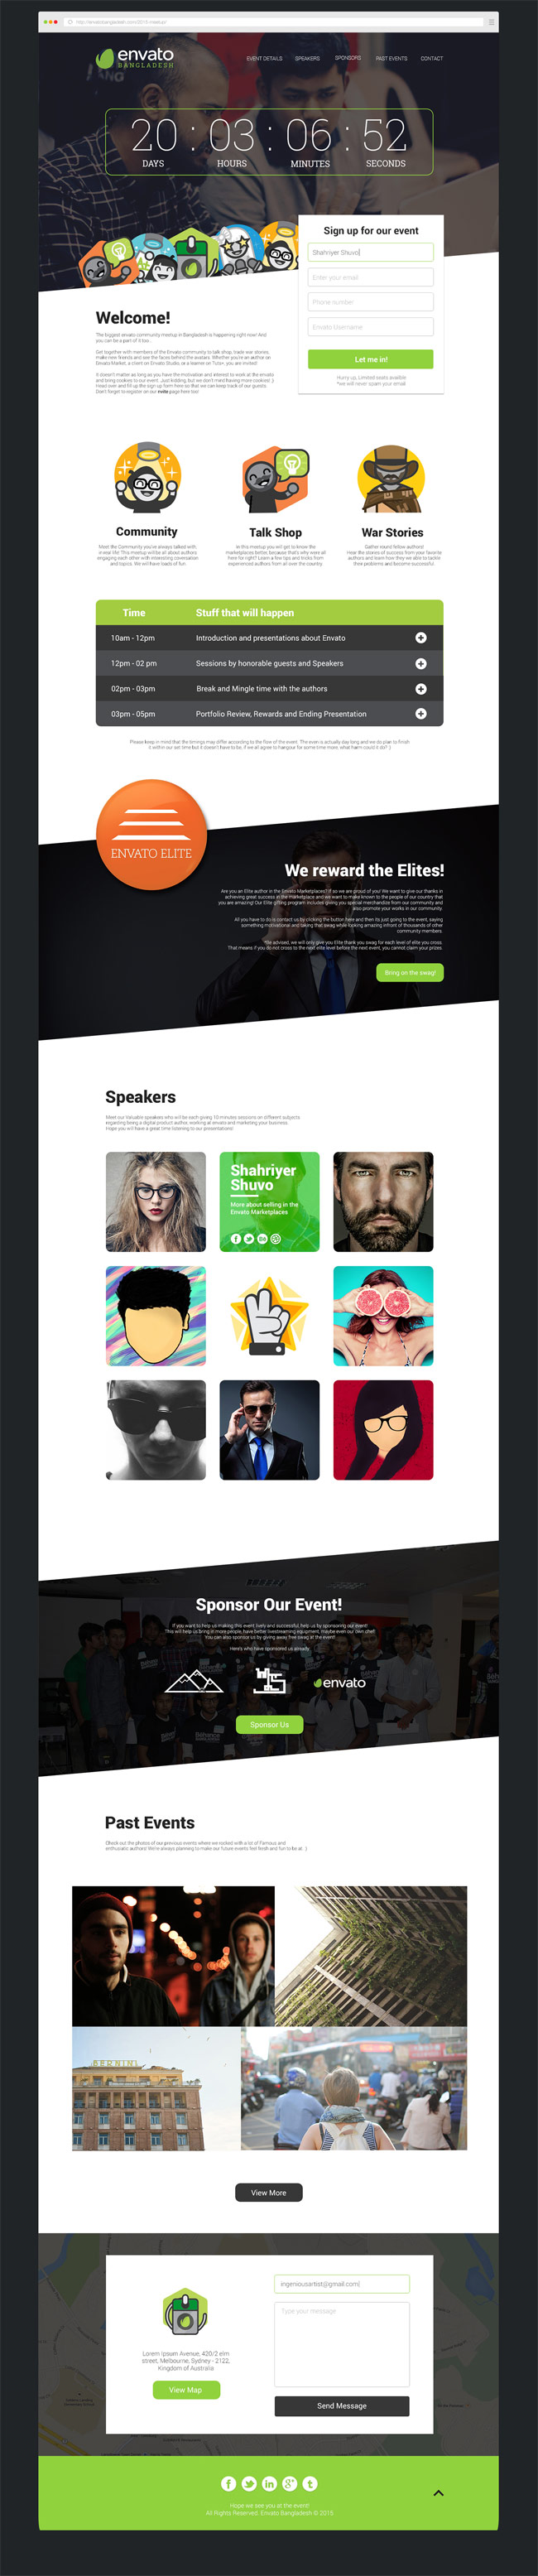 Meetup - Free Event Landing Page PSD/HTML